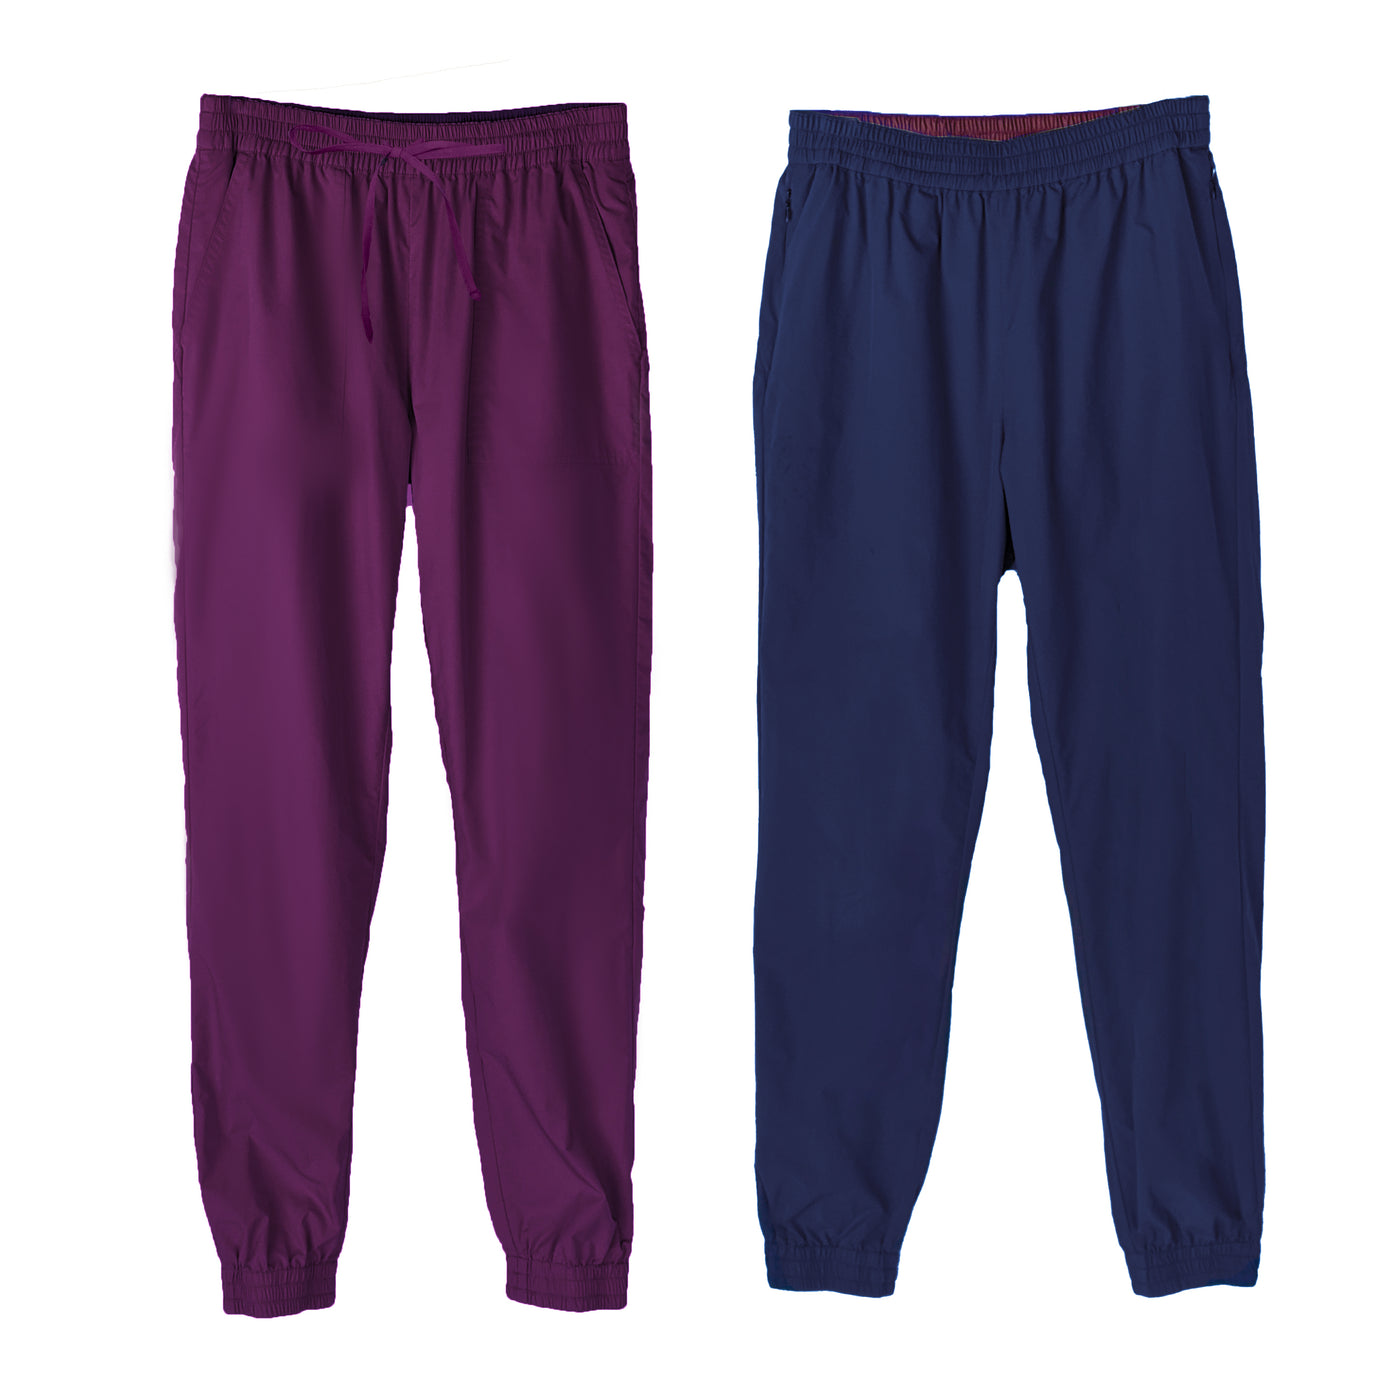 SPLICE clothing Phoenix Reversible Joggers Mulberry Lane and Navy Pier